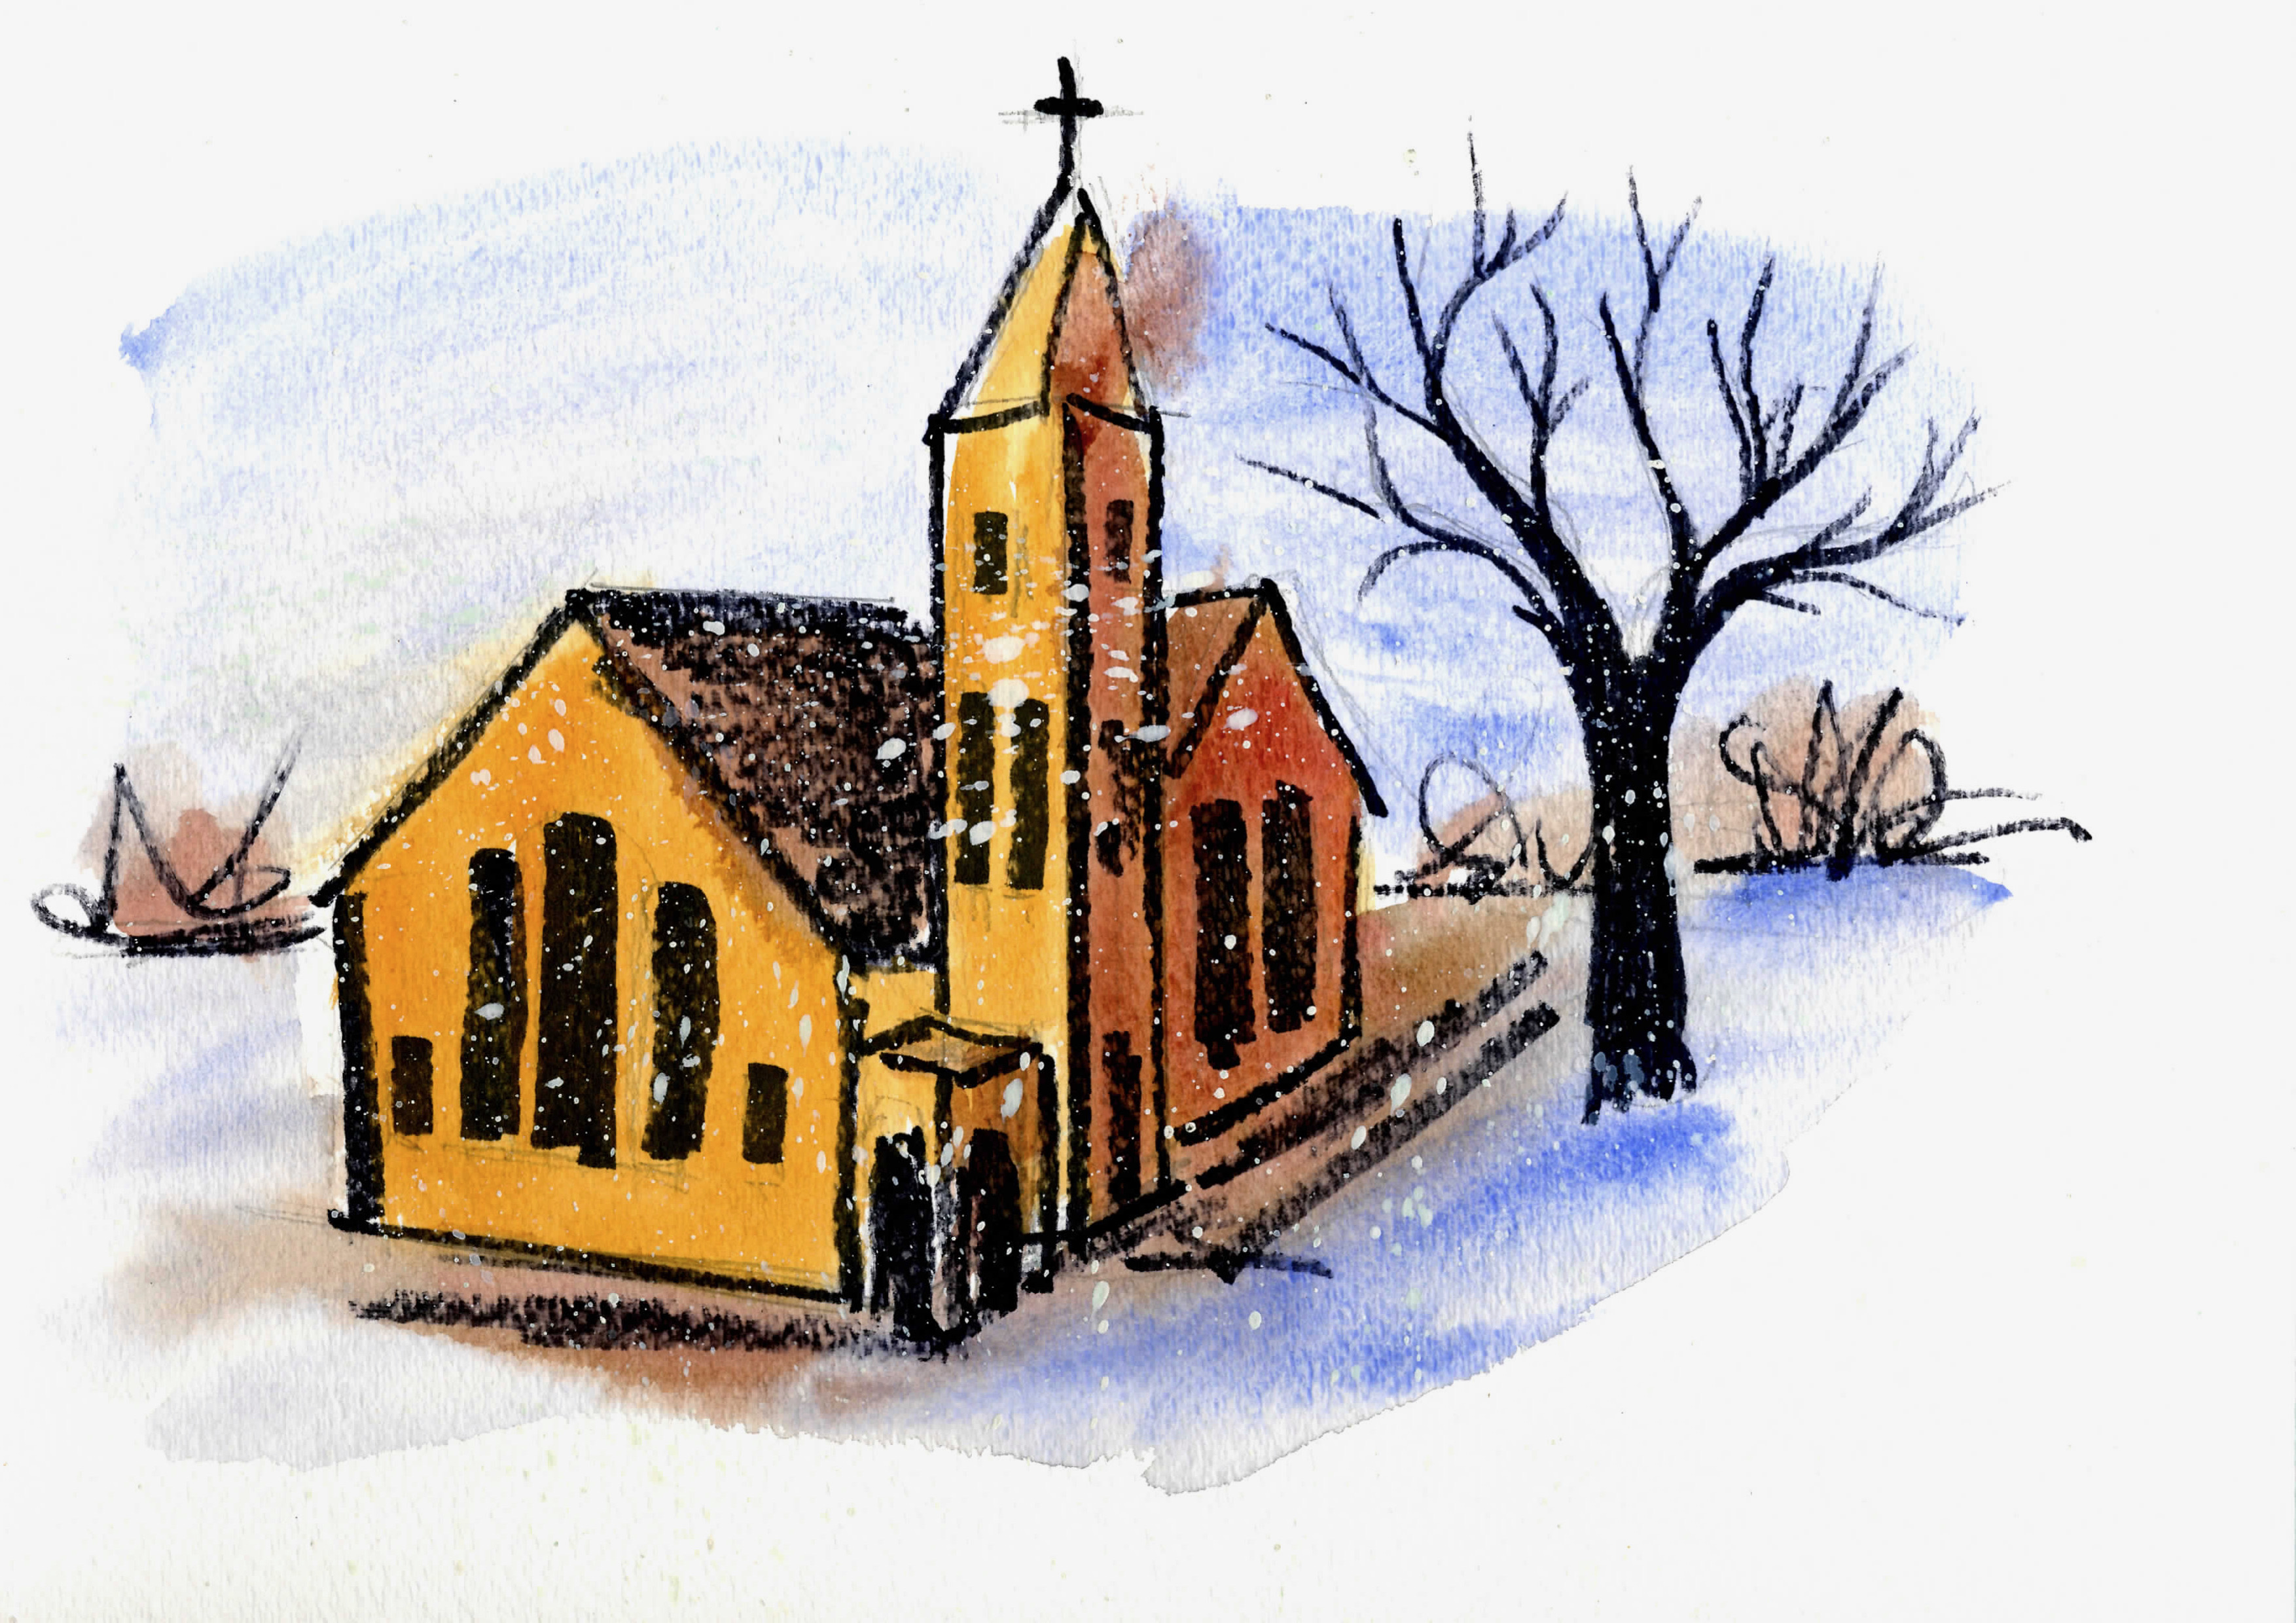 A picturesque church in the snow with trees in the background. Watercolor.